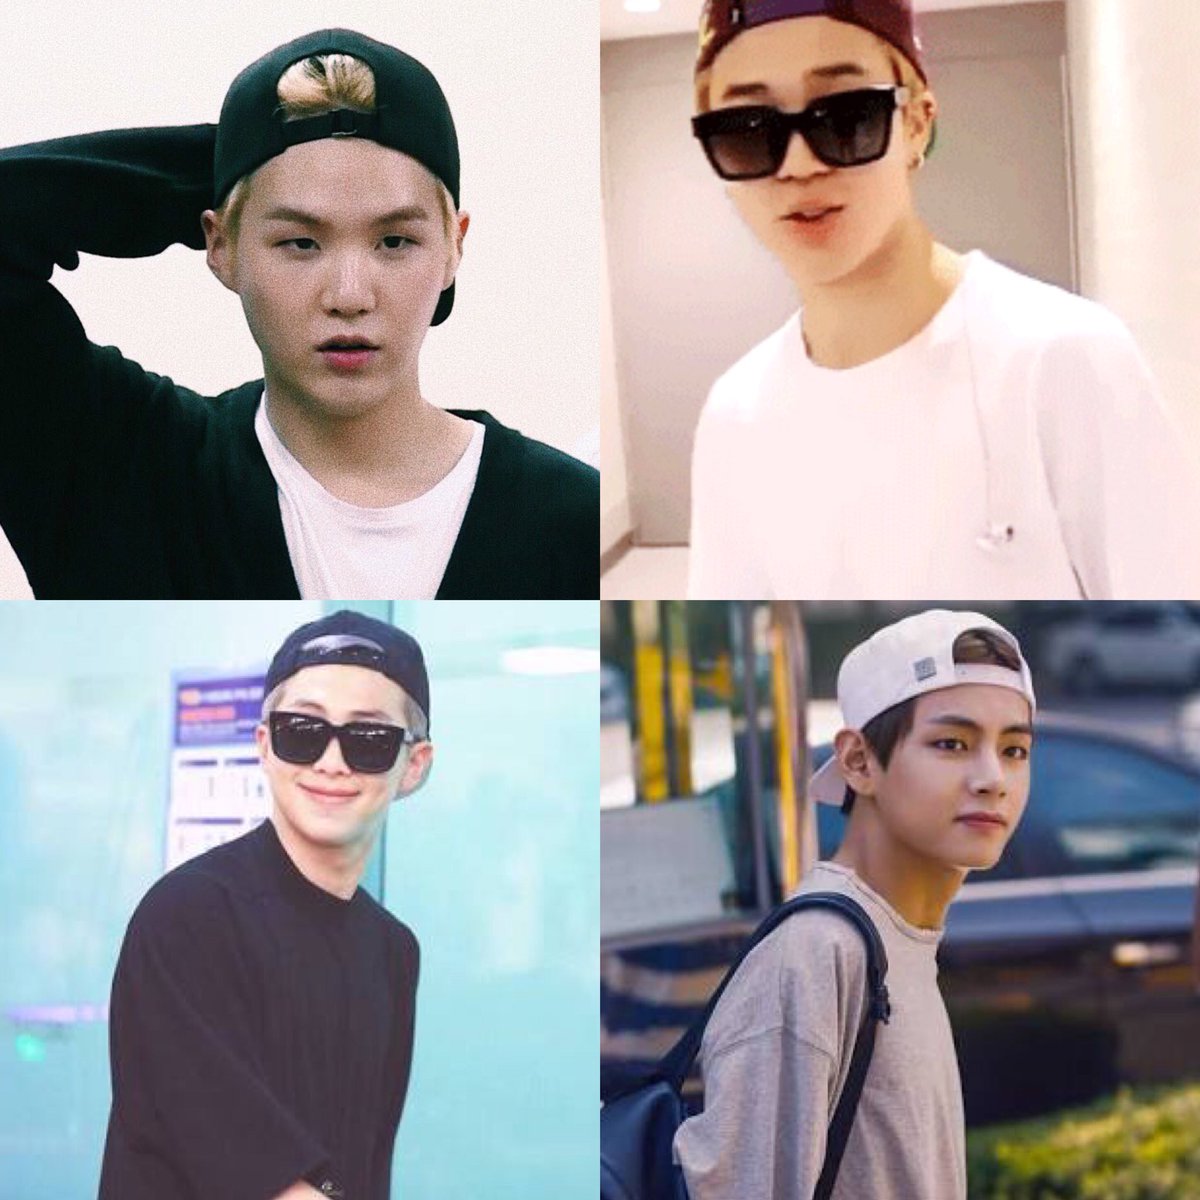 BTS wearing snapback is the only concept that matters.